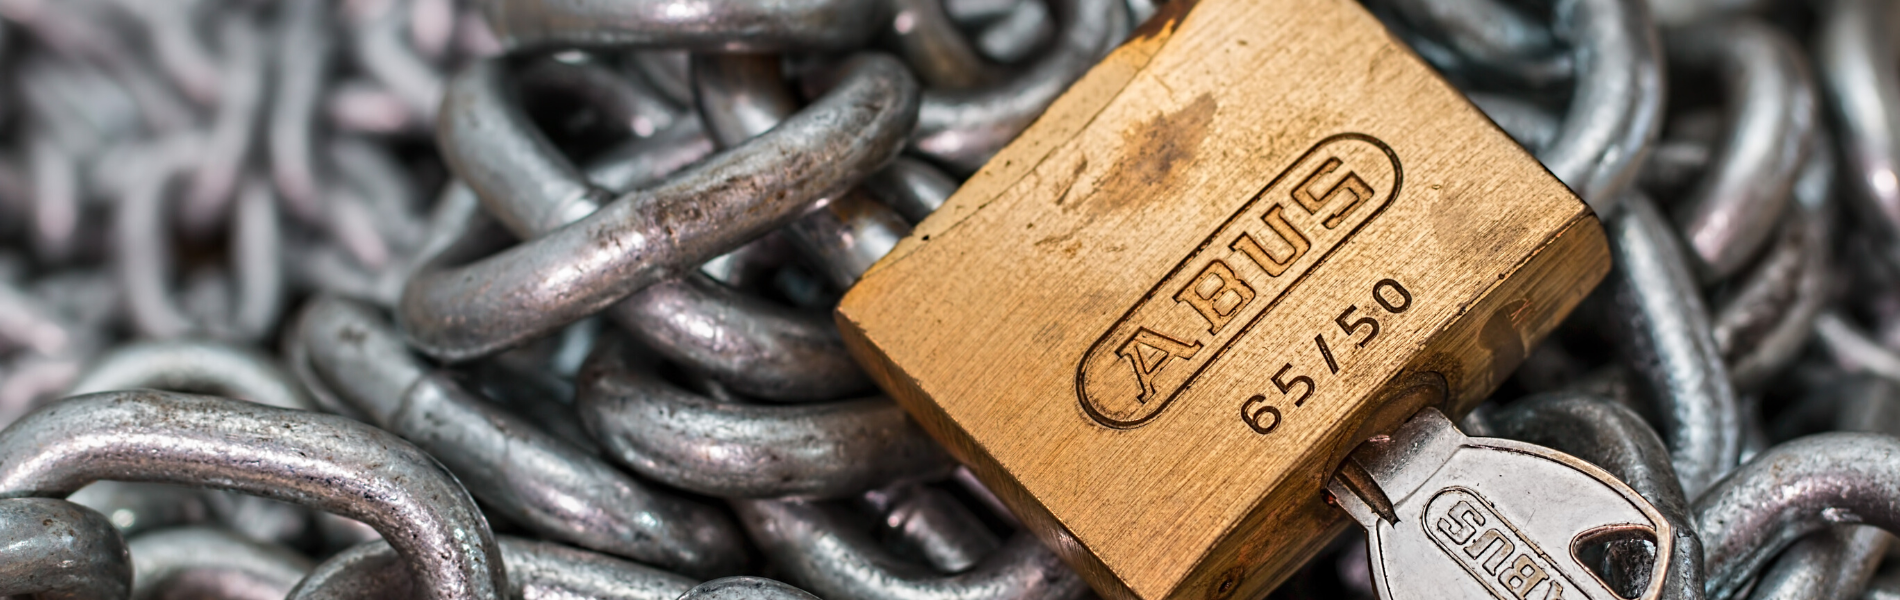 Close up of padlock with chains in the background - Link to Locking Devices & Reproduction of Keys